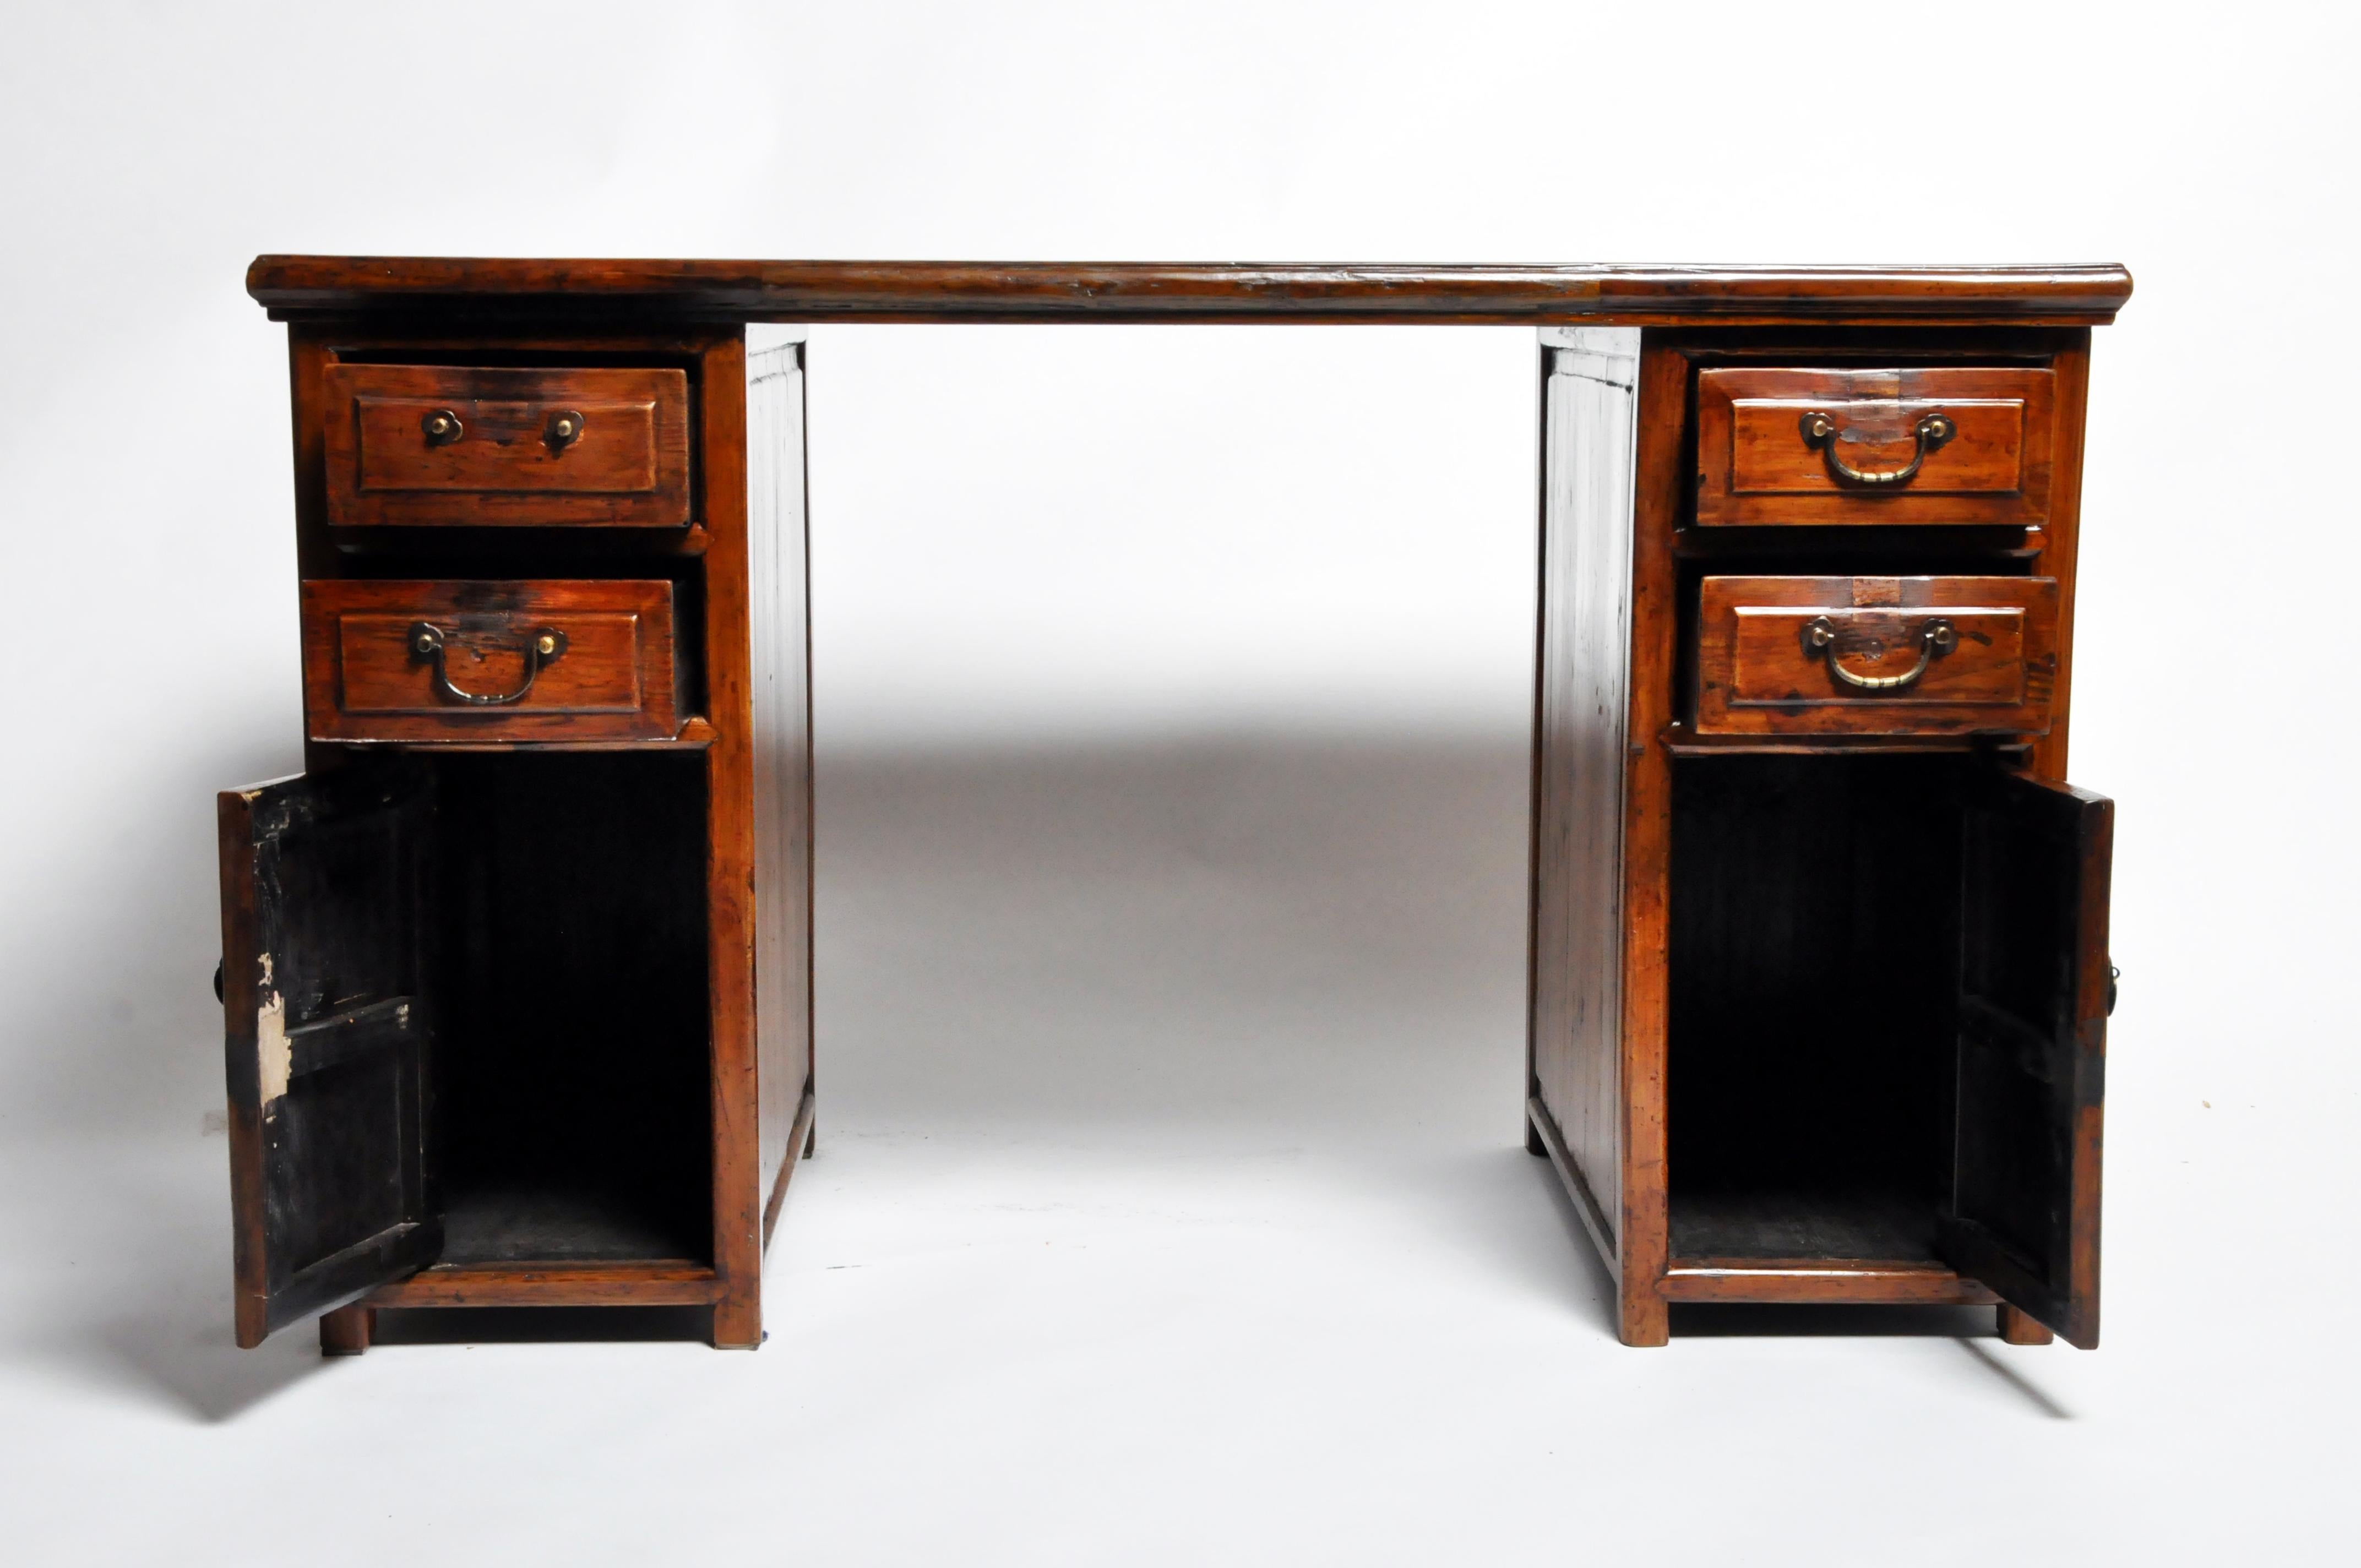 British Colonial Wooden Desk with Four Drawers and Two Doors 7